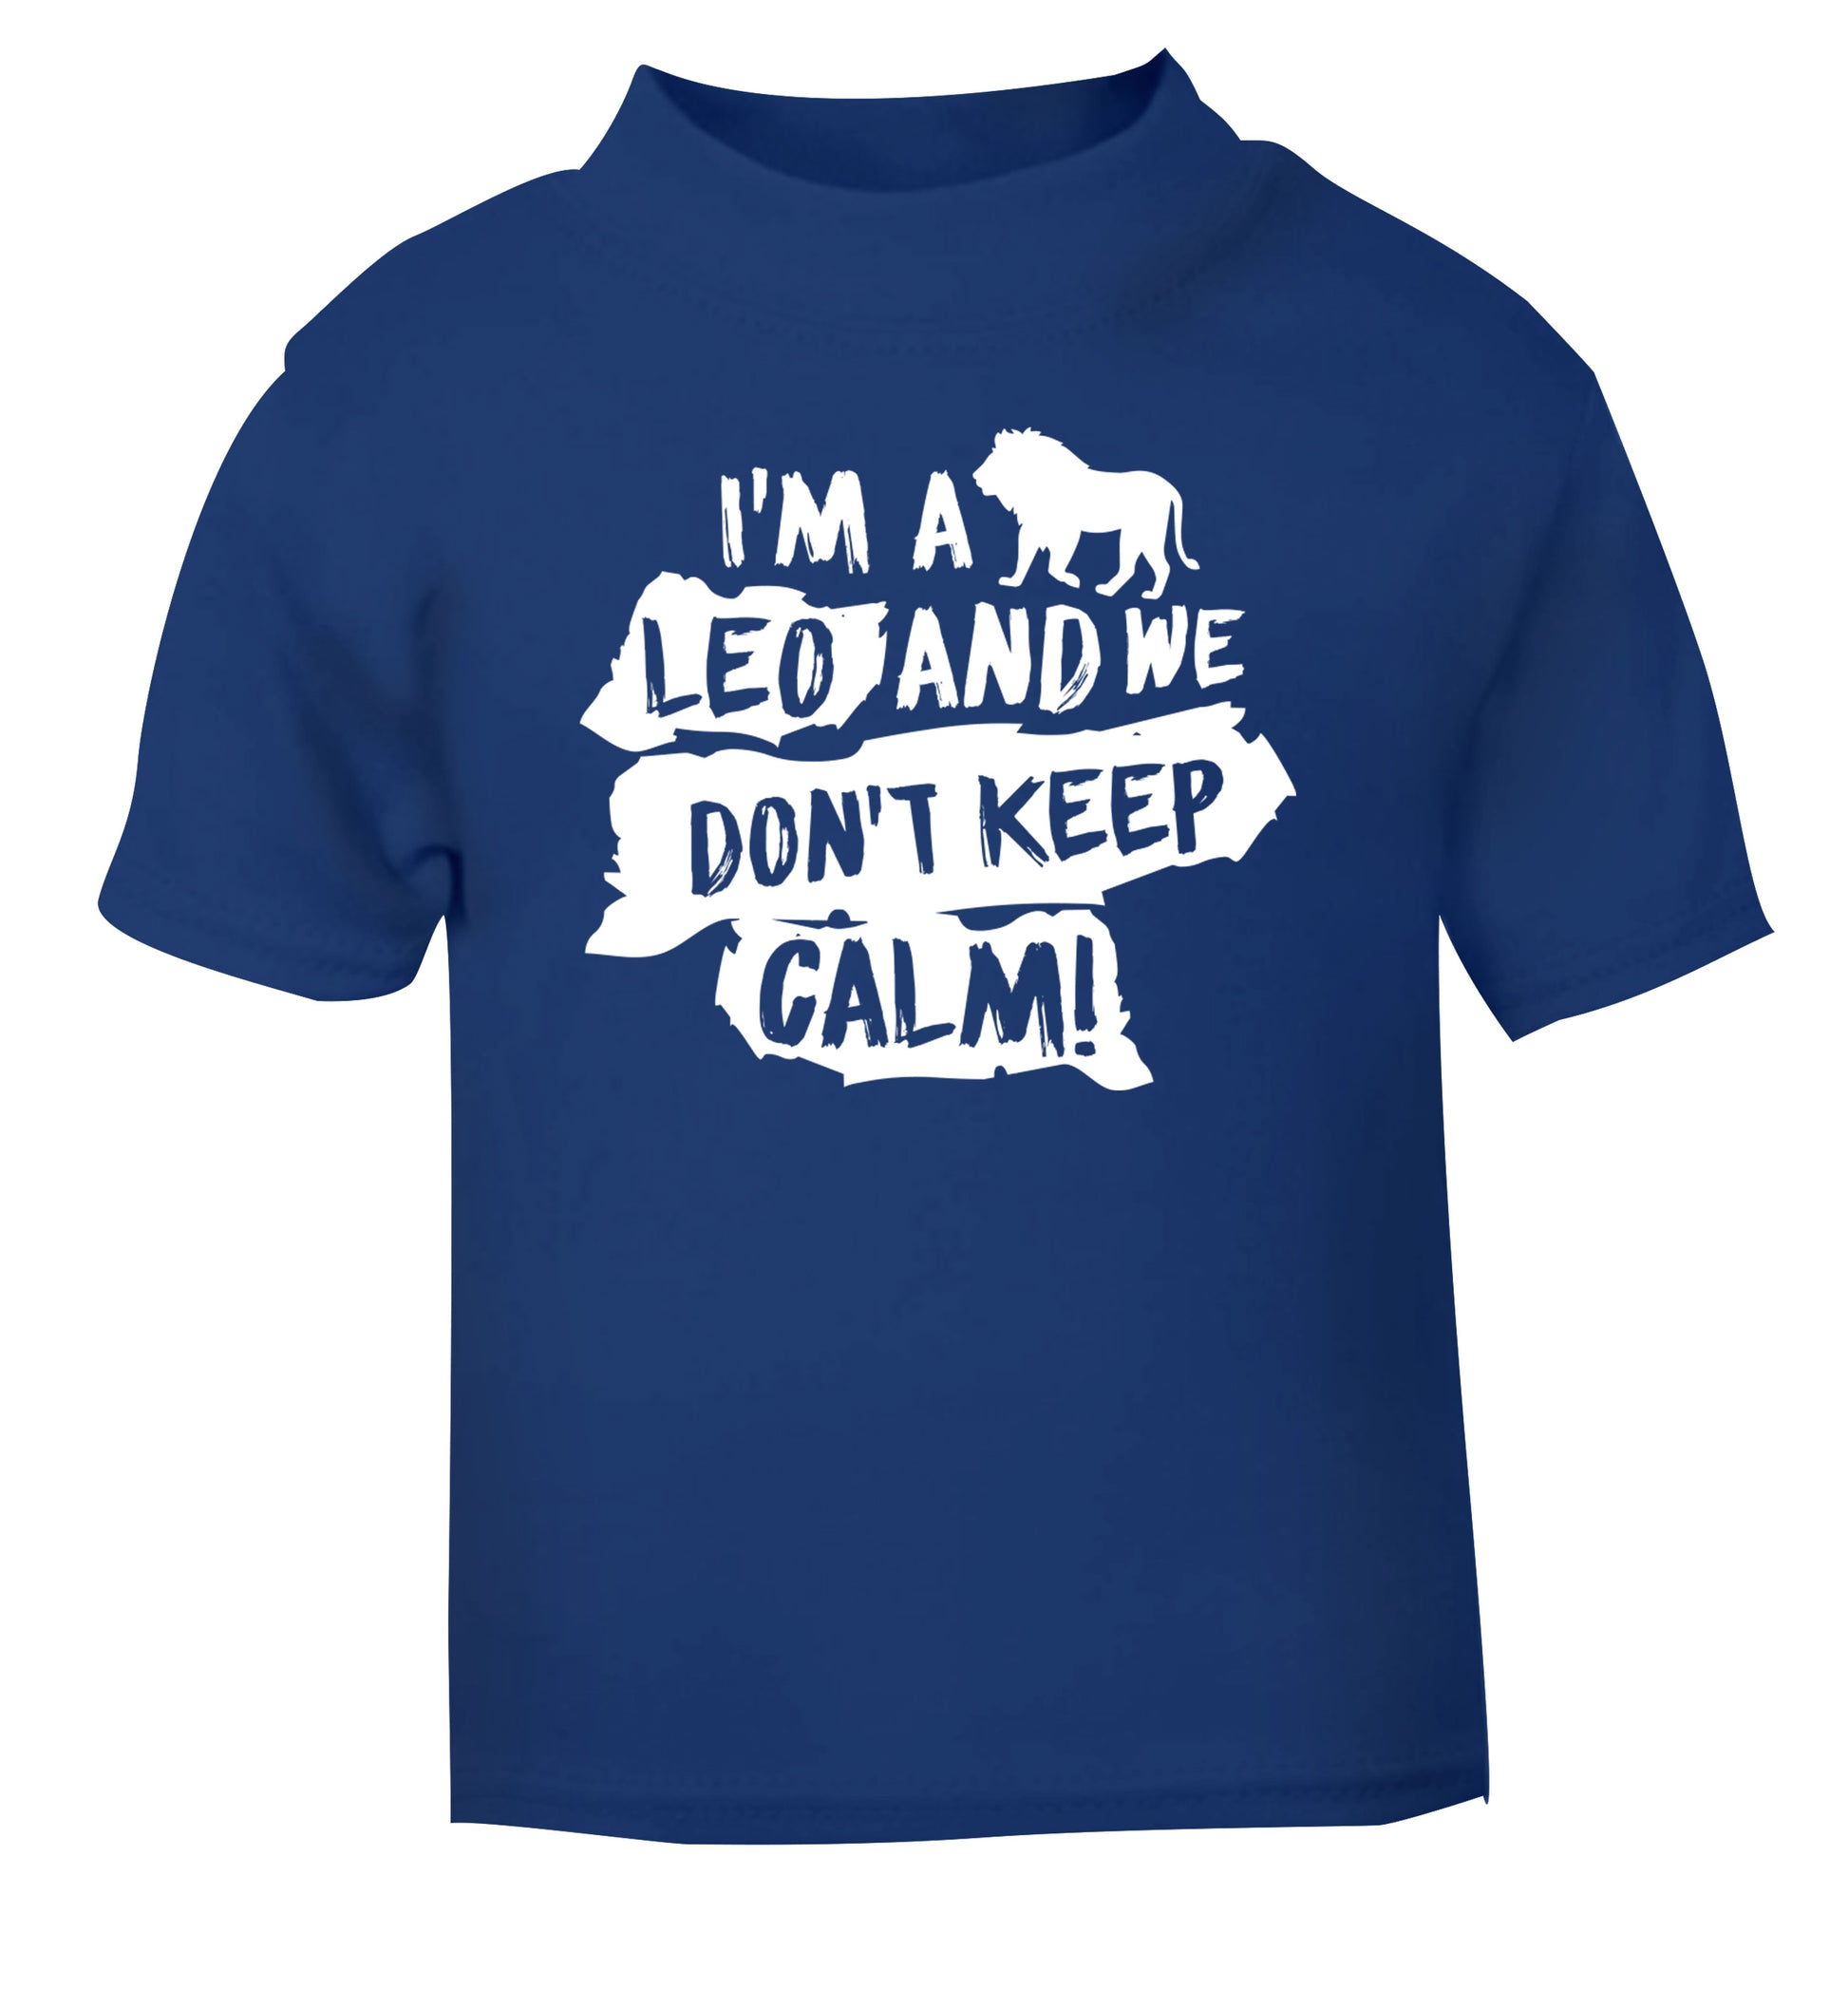 I'm a leo and we don't keep calm! blue Baby Toddler Tshirt 2 Years